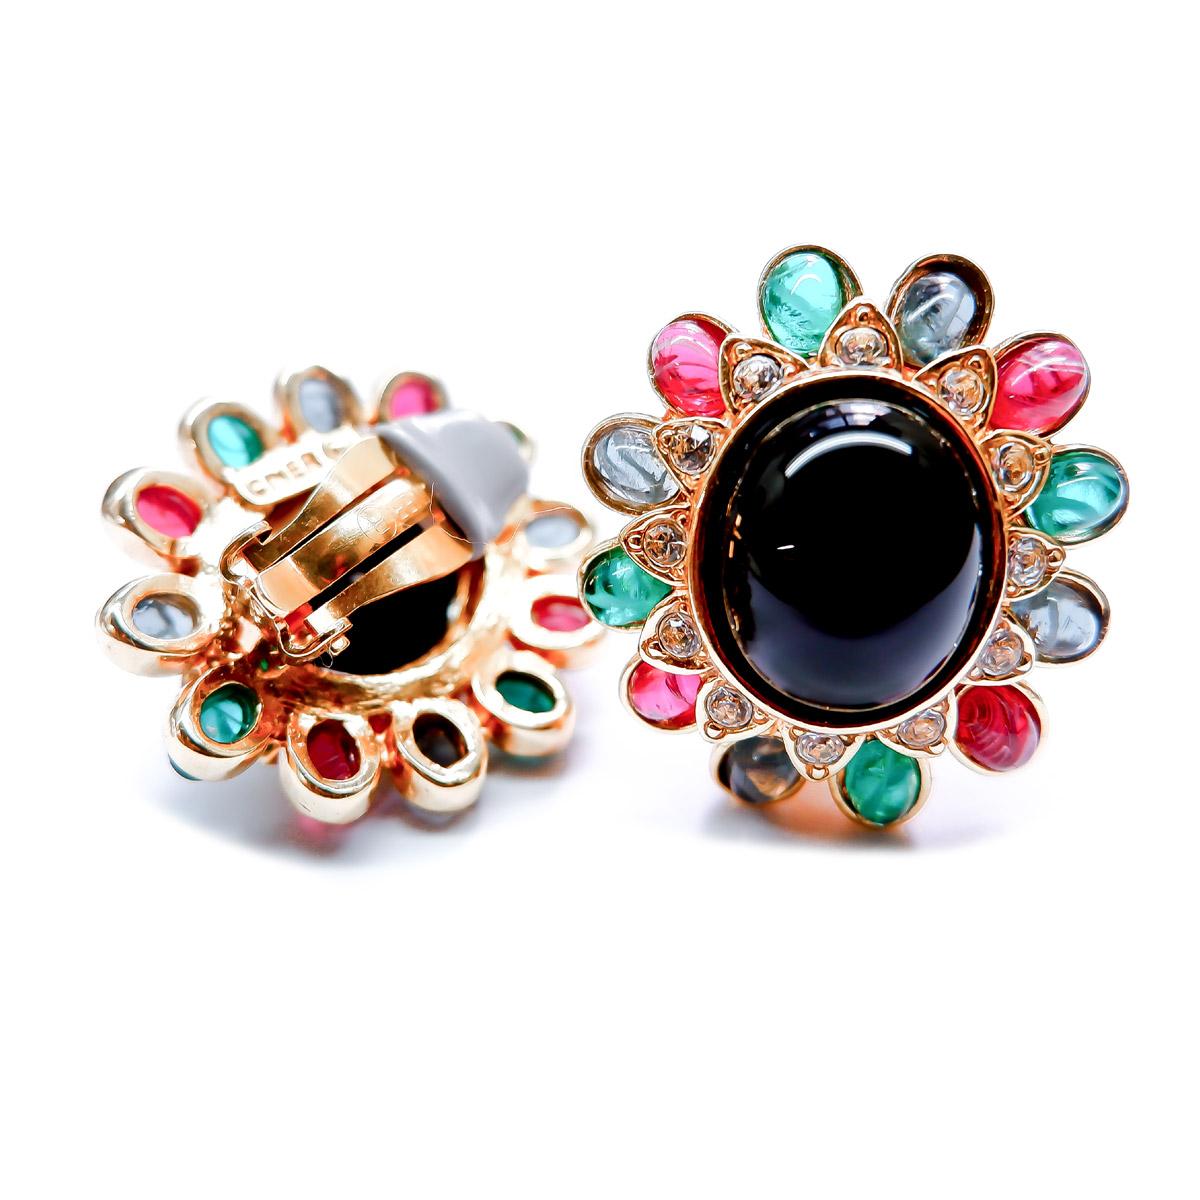 These gorgeous clip earrings have a ruby, emerald, sapphire cabochon trim with a stunning jet cabochon center. These earrings will add the perfect amount of vintage charm to any ensemble. 
Materials:
Pewter
18K Gold Plating
Sapphire Cabochons
Ruby